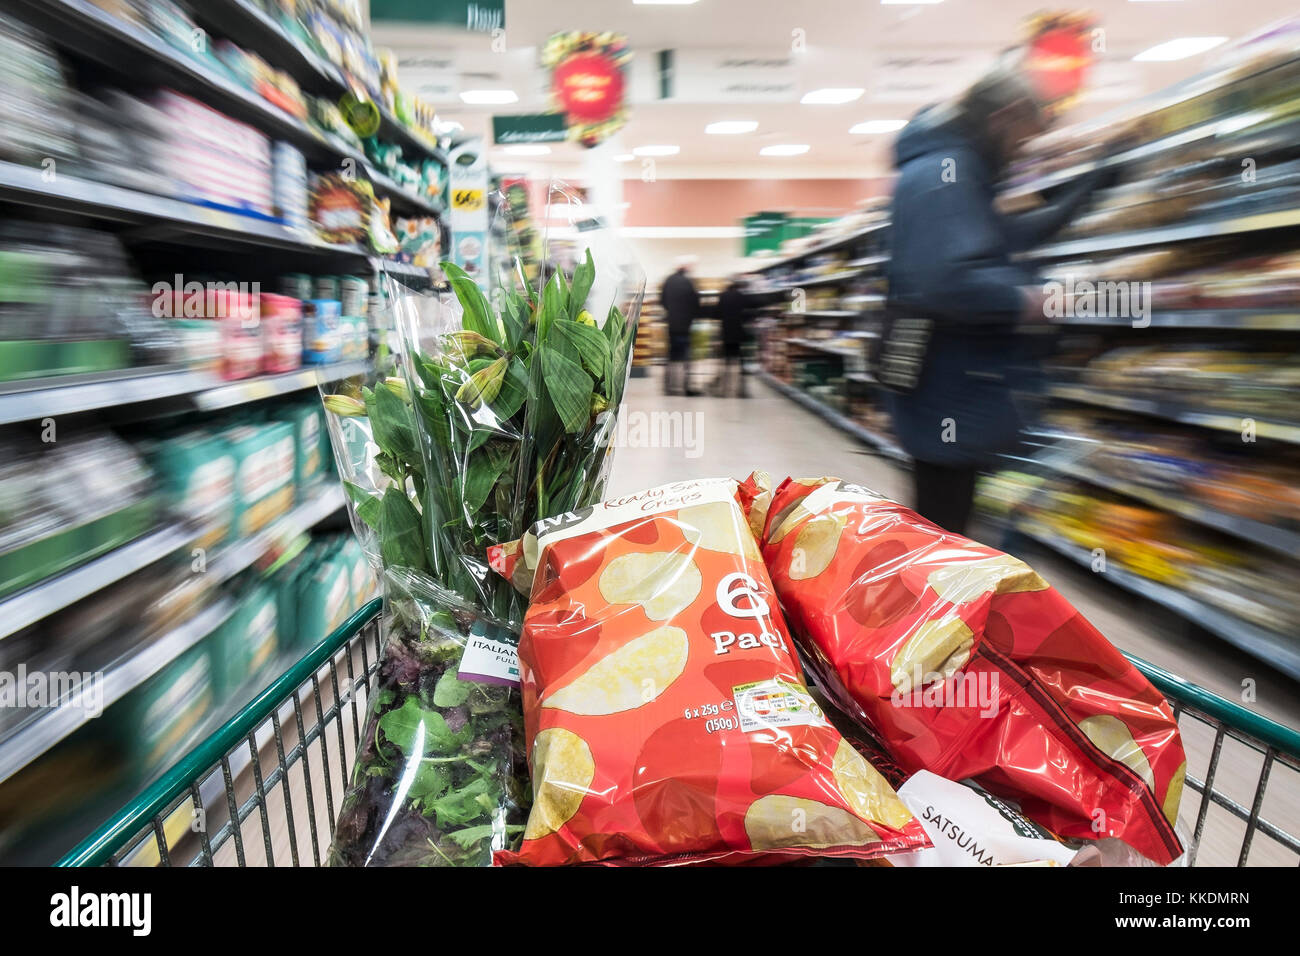 A shopping trolley full of goods being pushed down an aisle in a supermarket. Stock Photo